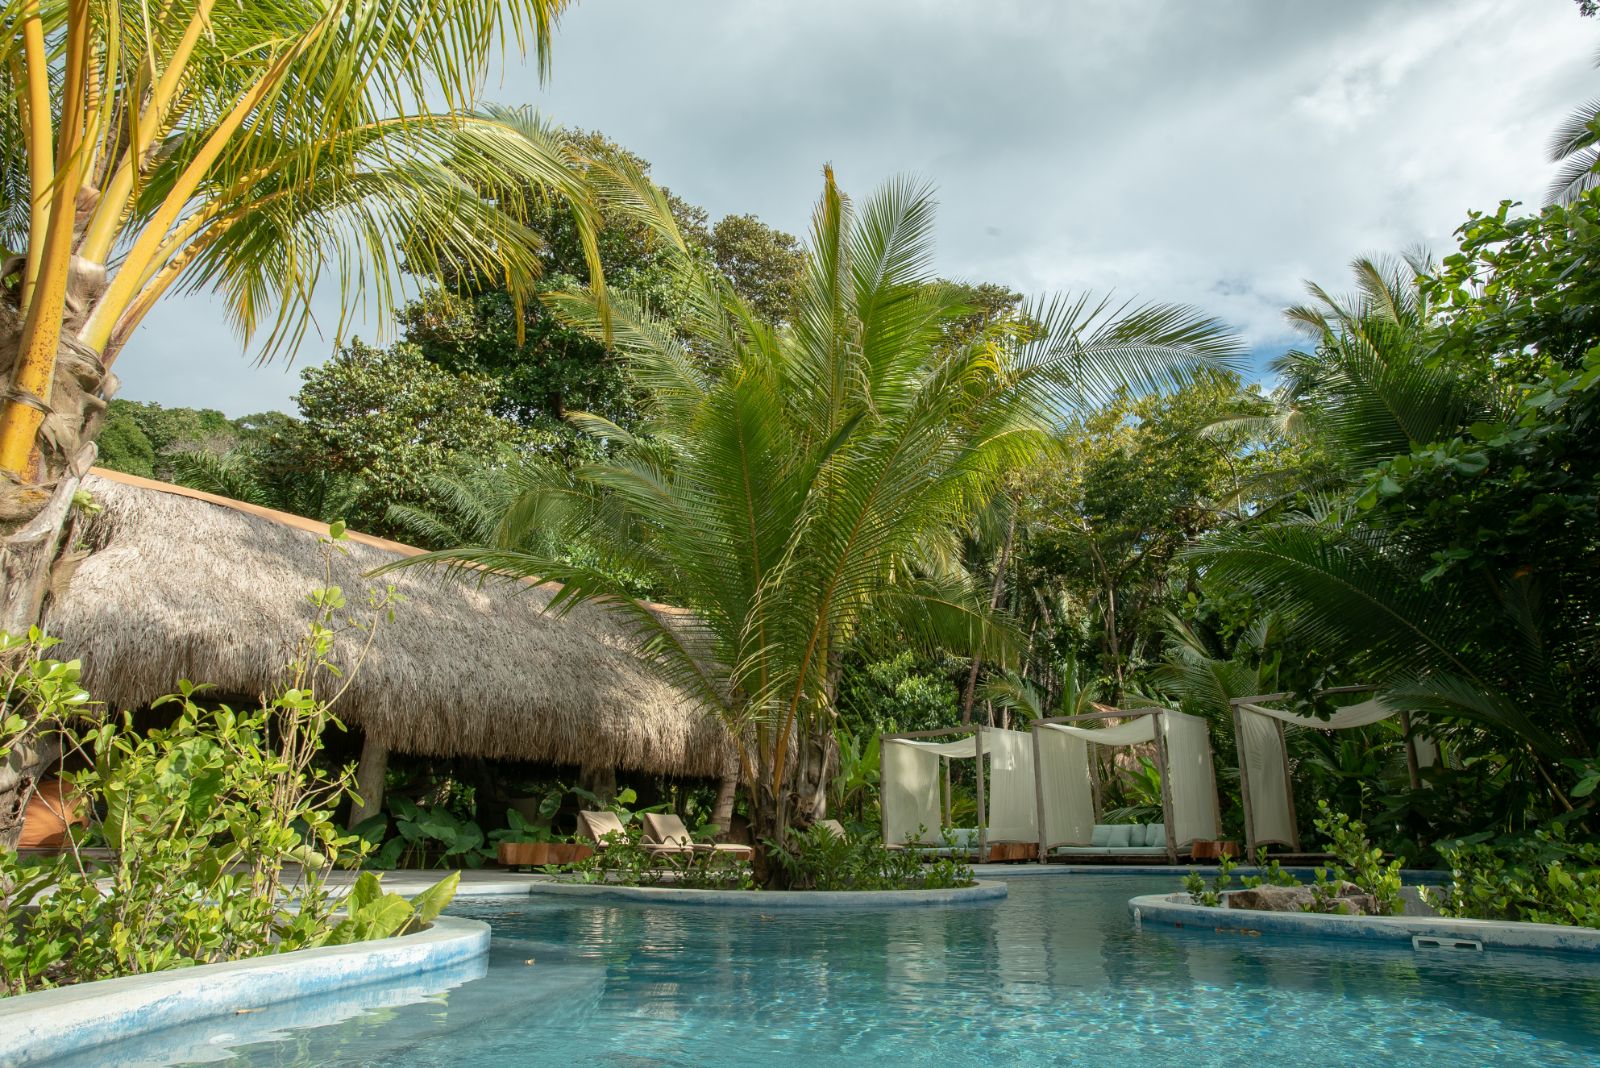 Poolside at Isla Palenque in the Chiriqui region of Panama